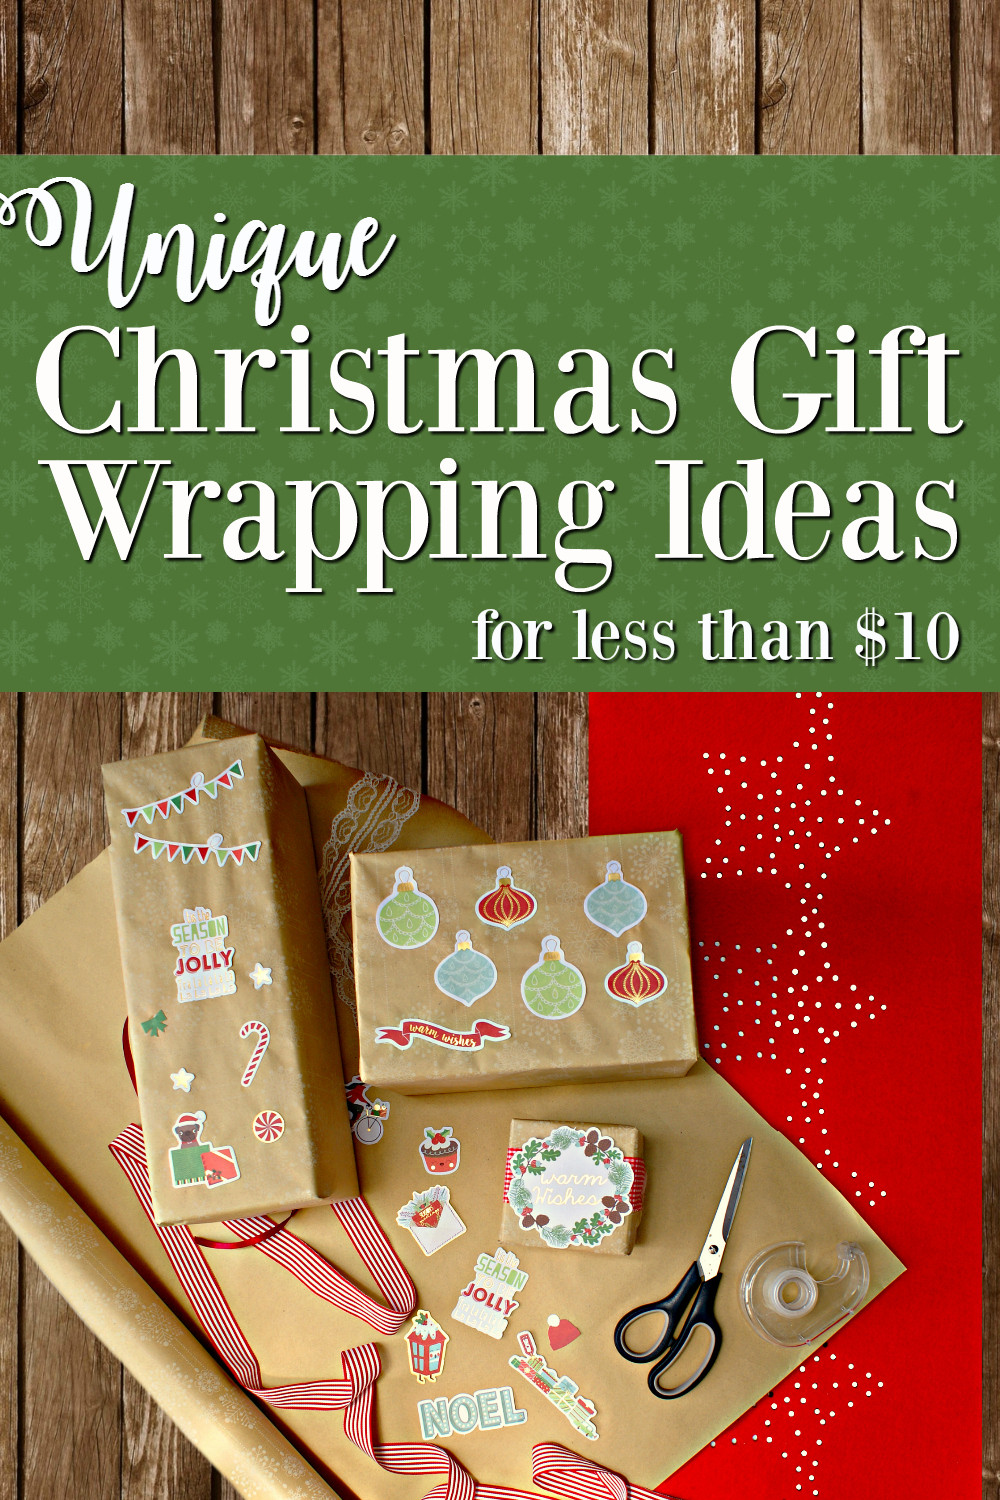 Uniques Christmas Gift Ideas
 Southern In Law Unique Gift Wrapping Ideas for Christmas